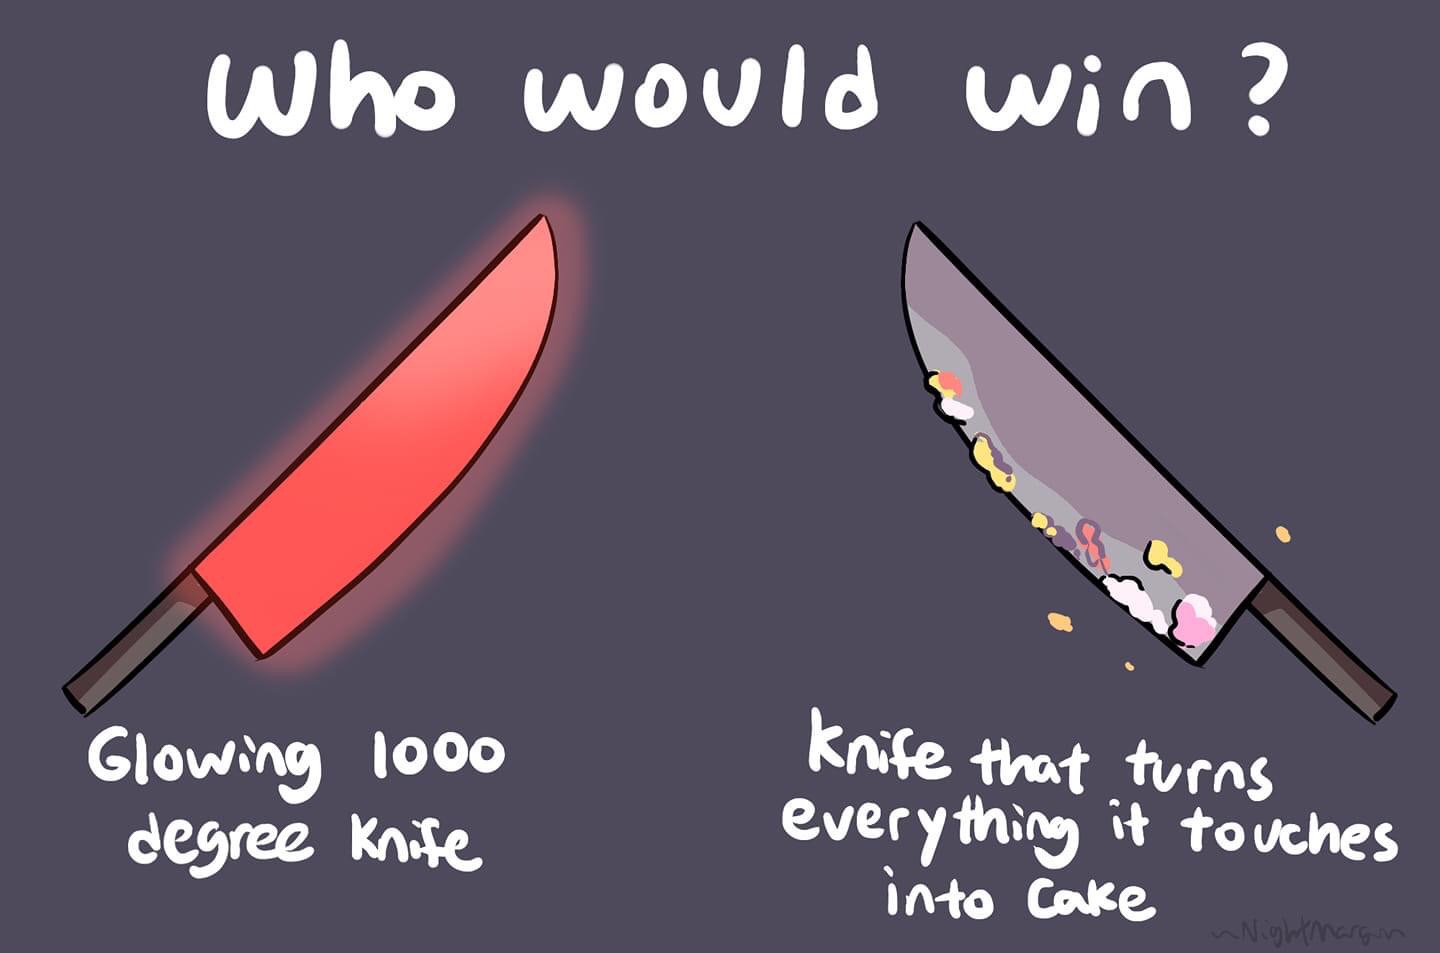 angle - Who would win ? Glowing 1000 degree Knife Knife that turns everything it touches into cake ~Nightmargin